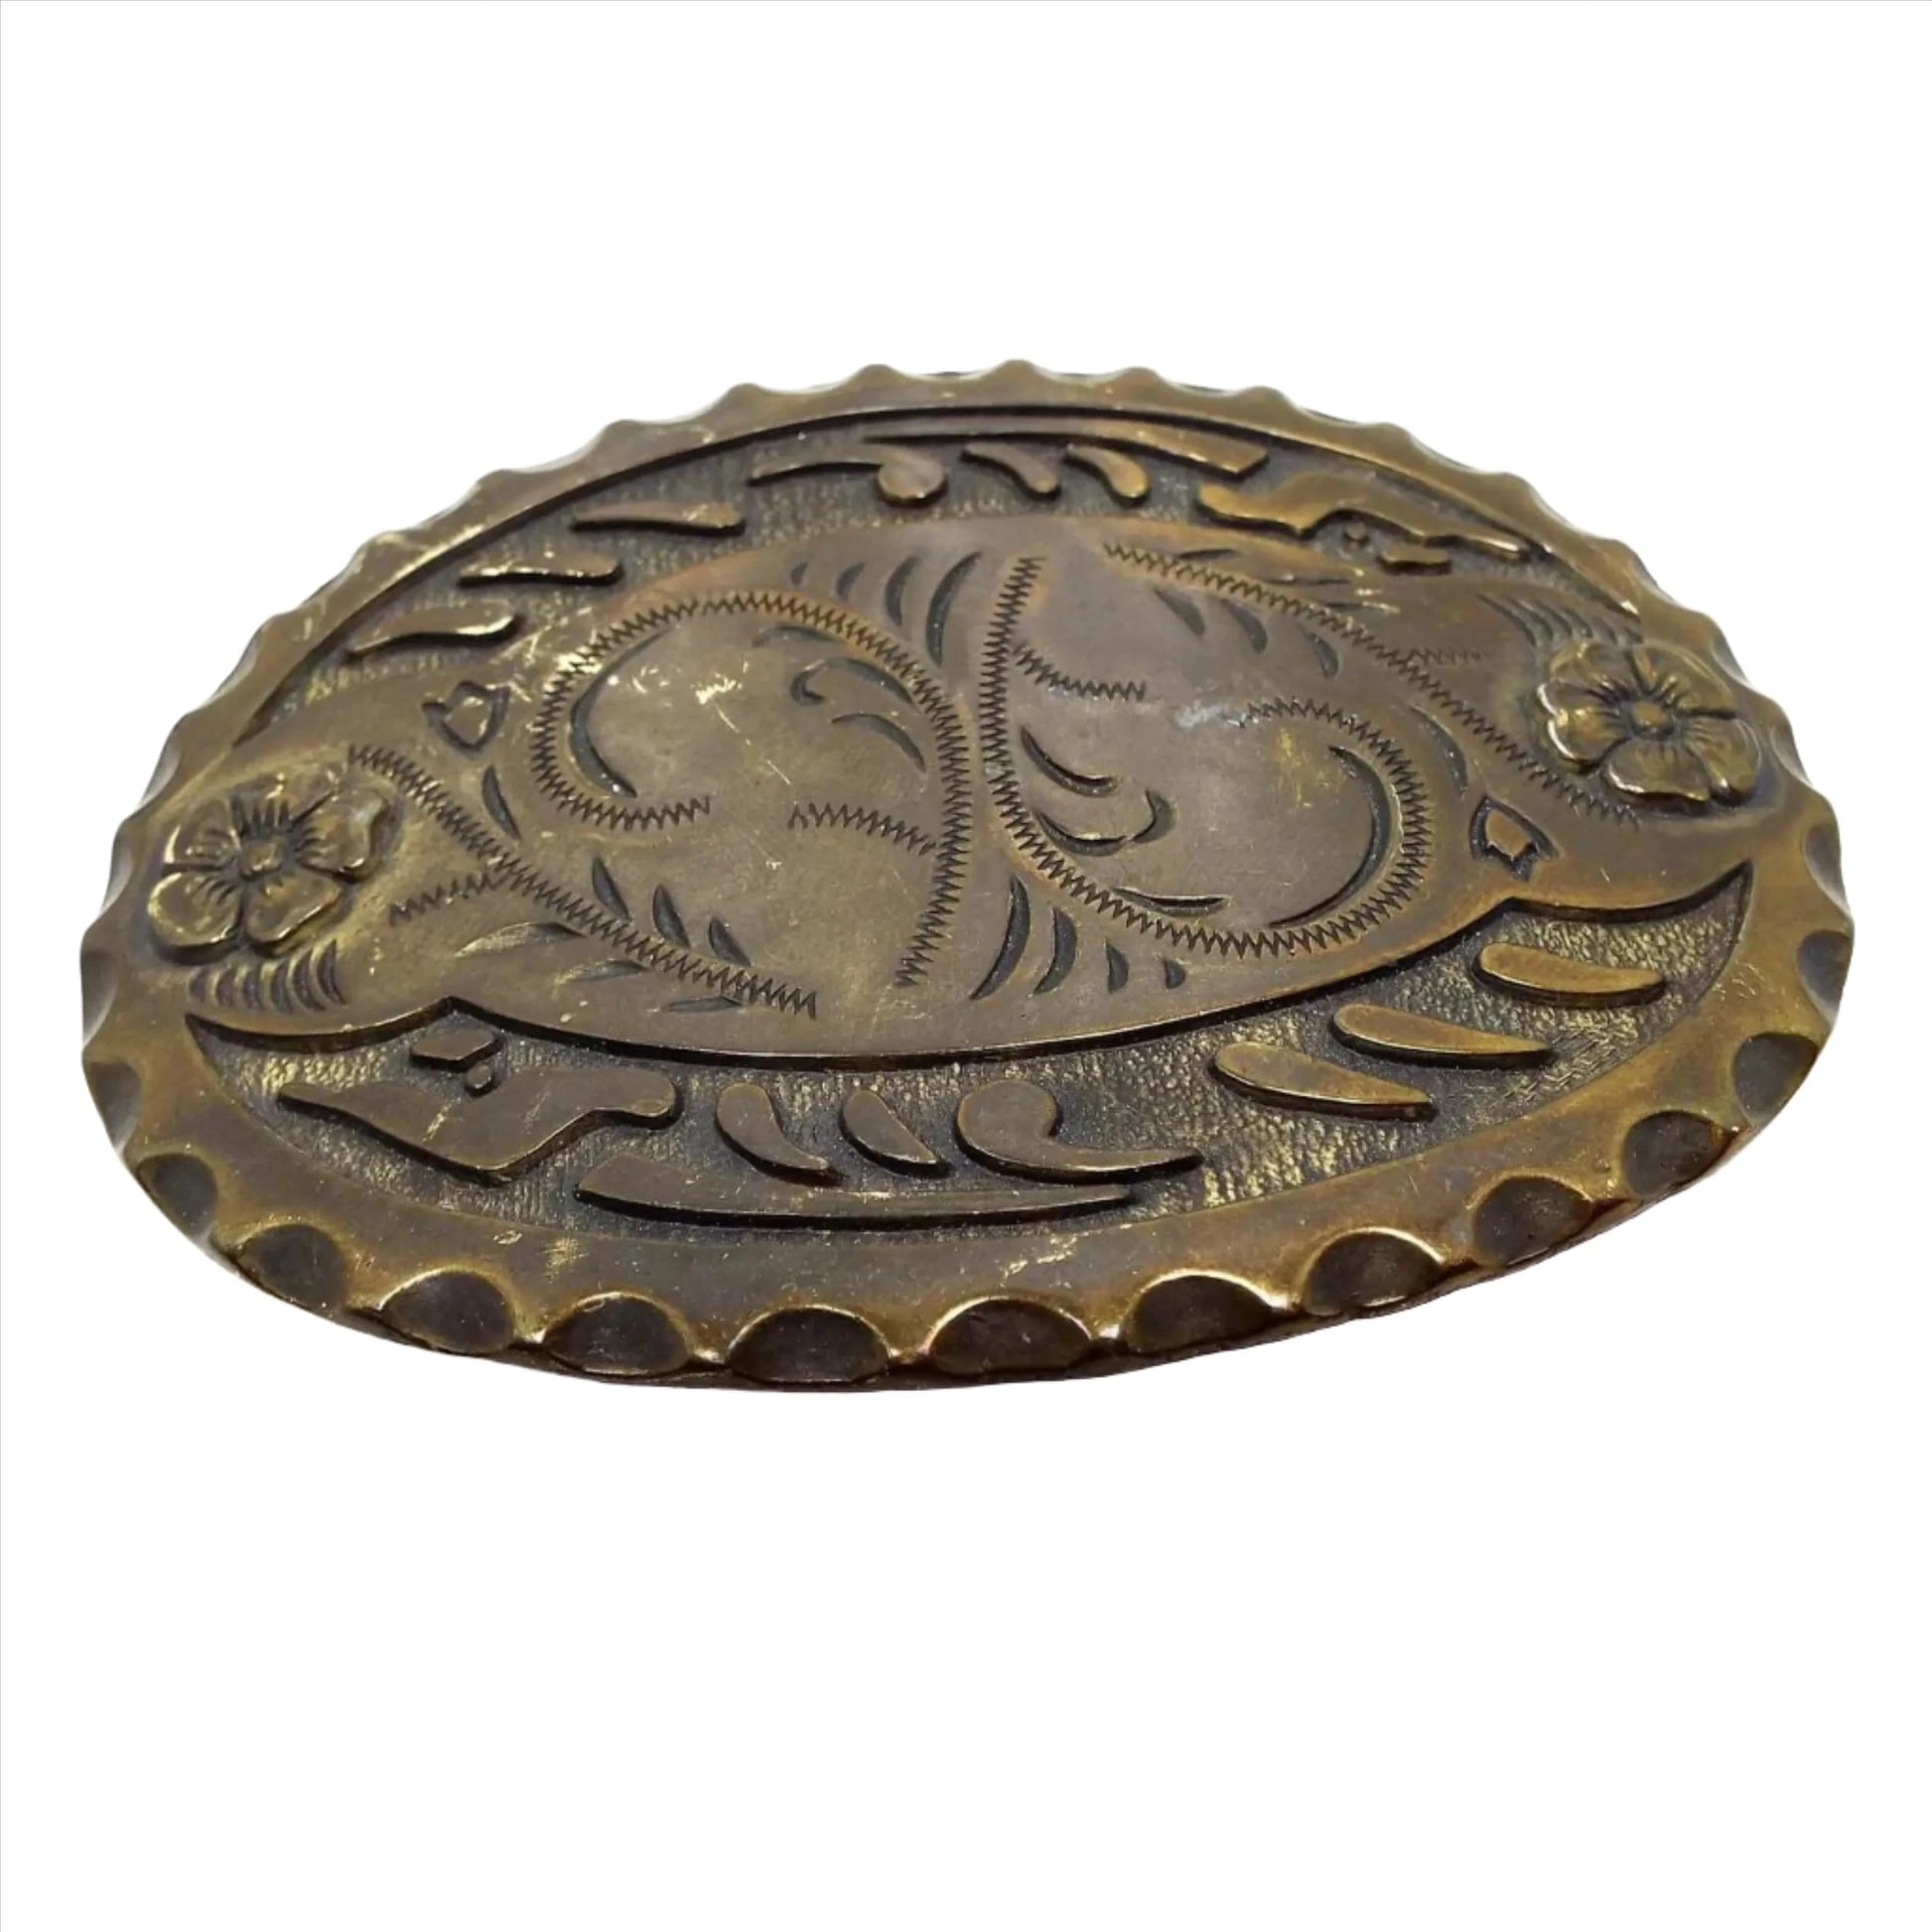 Front view of the retro vintage antiqued brass oval belt buckle. It has a scalloped edge and a cut floral design on the front.